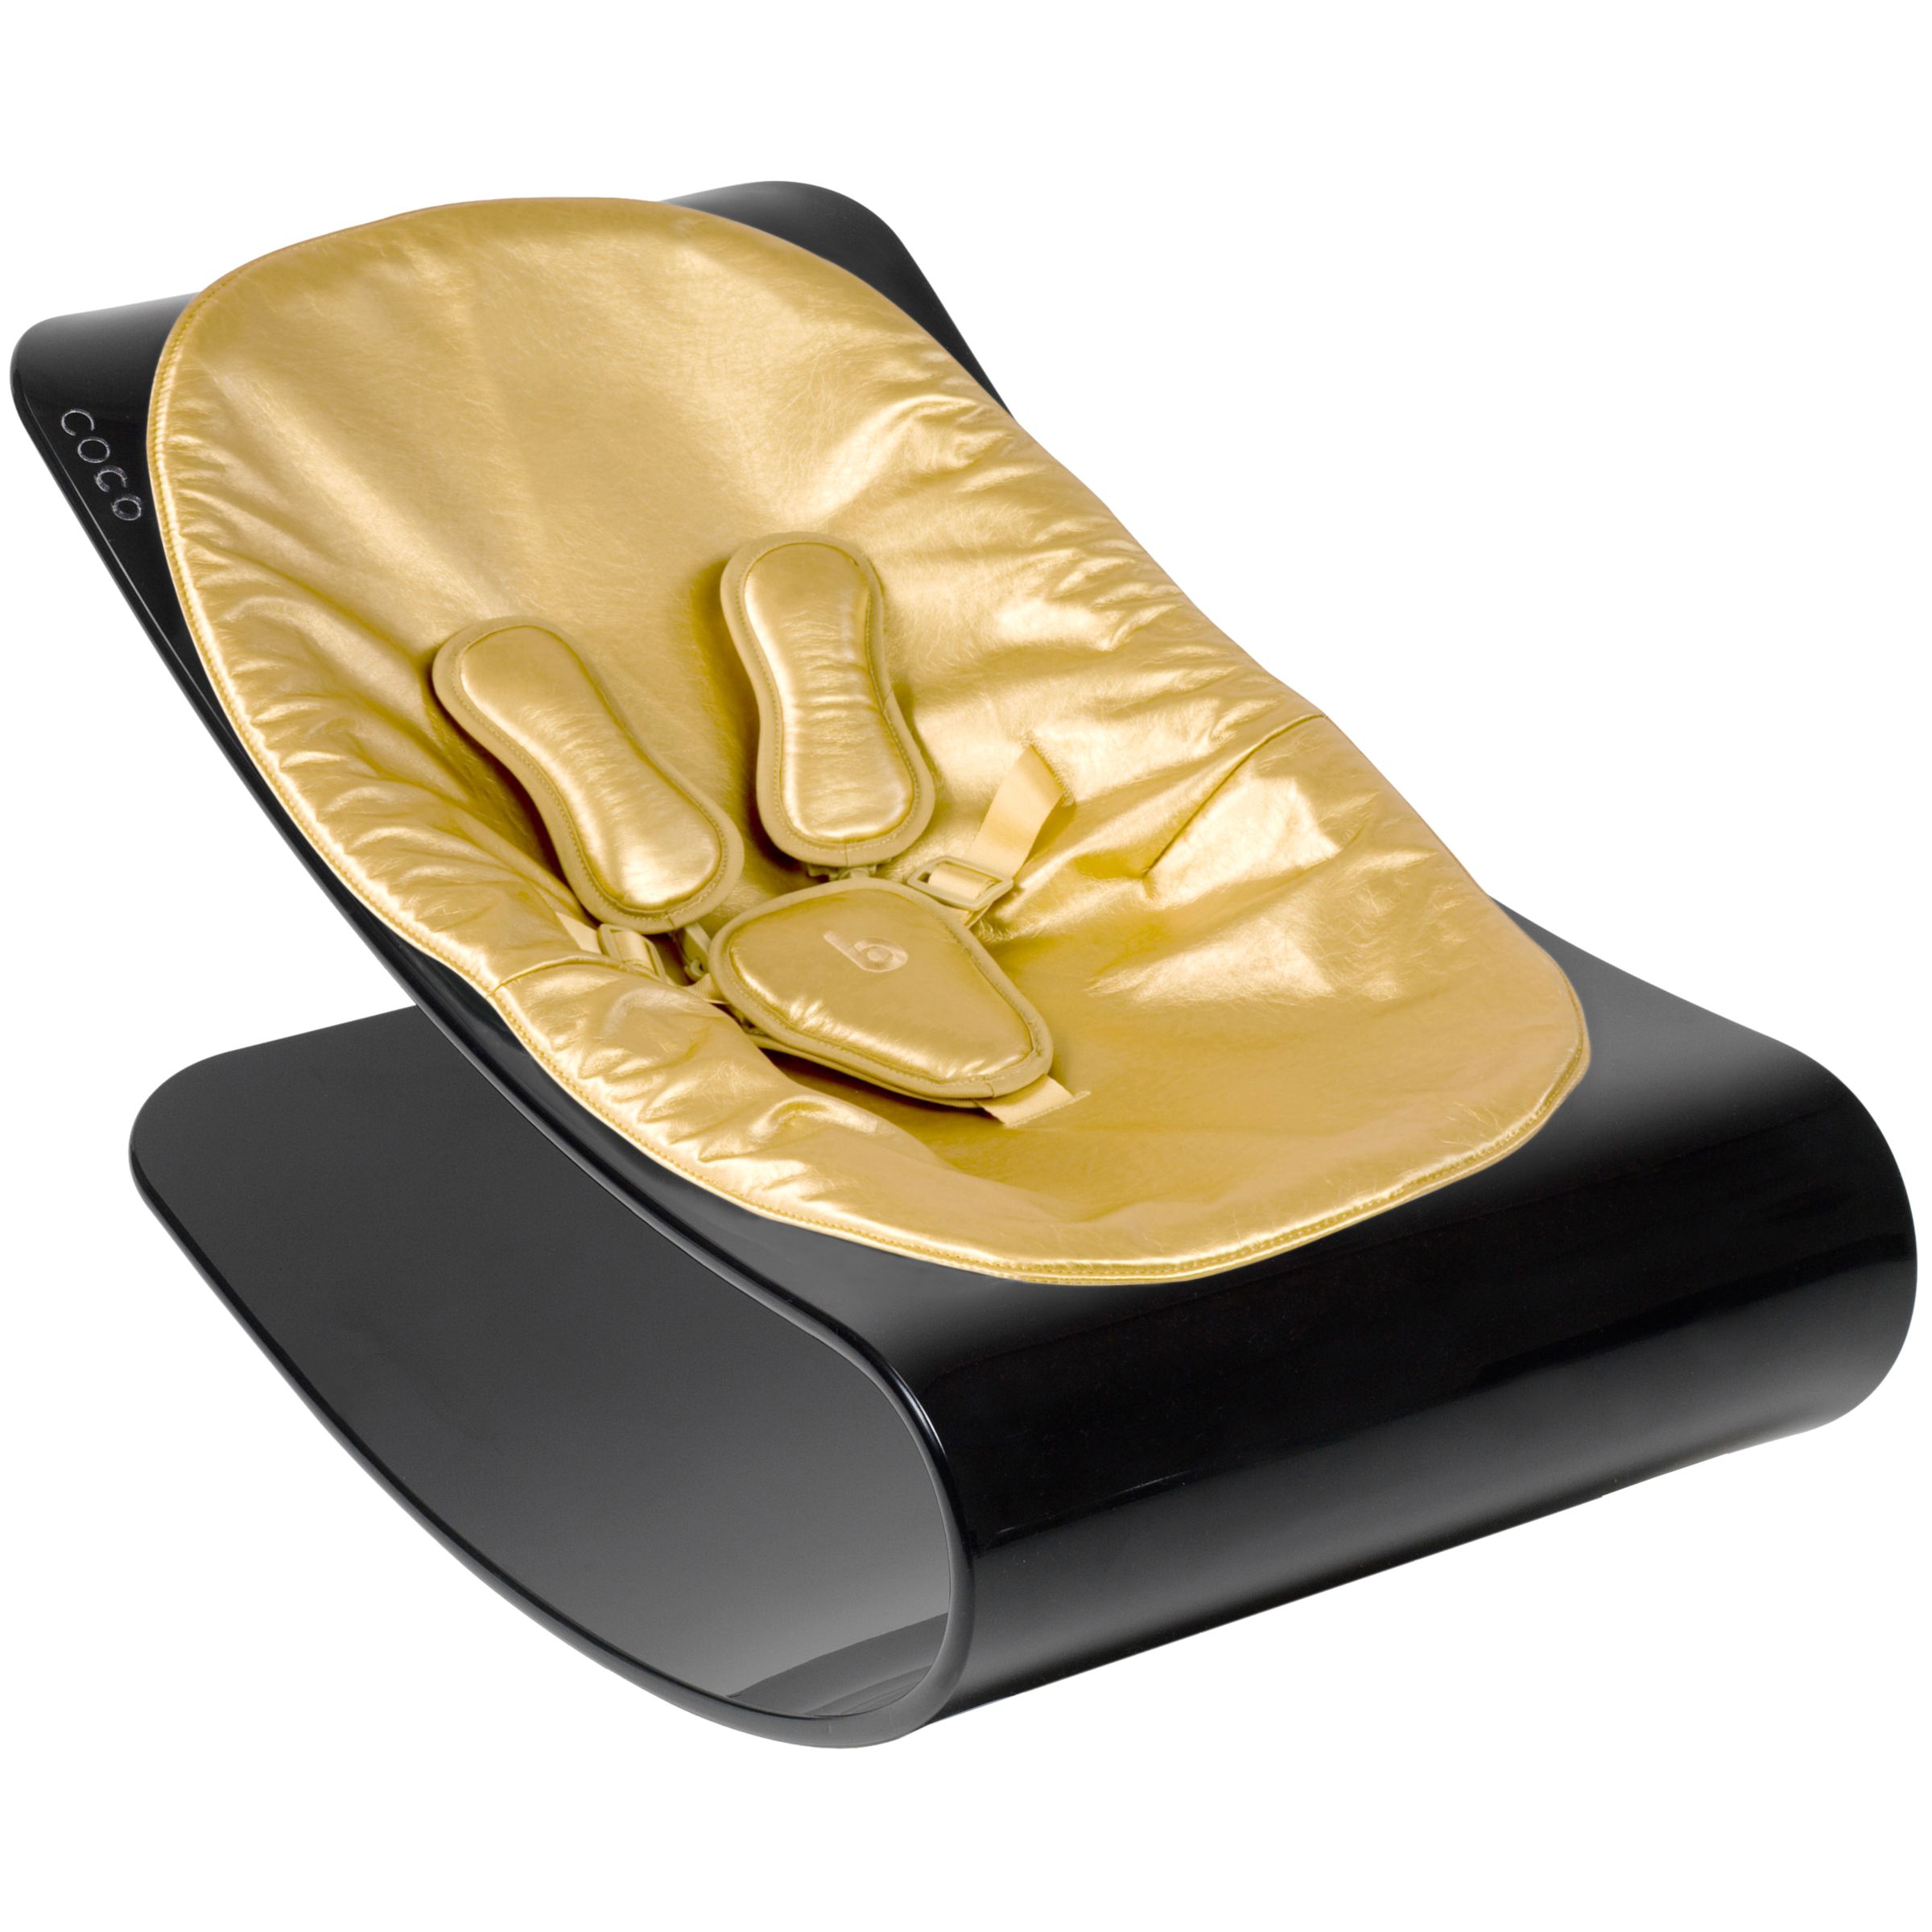 bloom Coco Plexistyle Baby Lounger, Ebony Black with Solar Gold at John Lewis